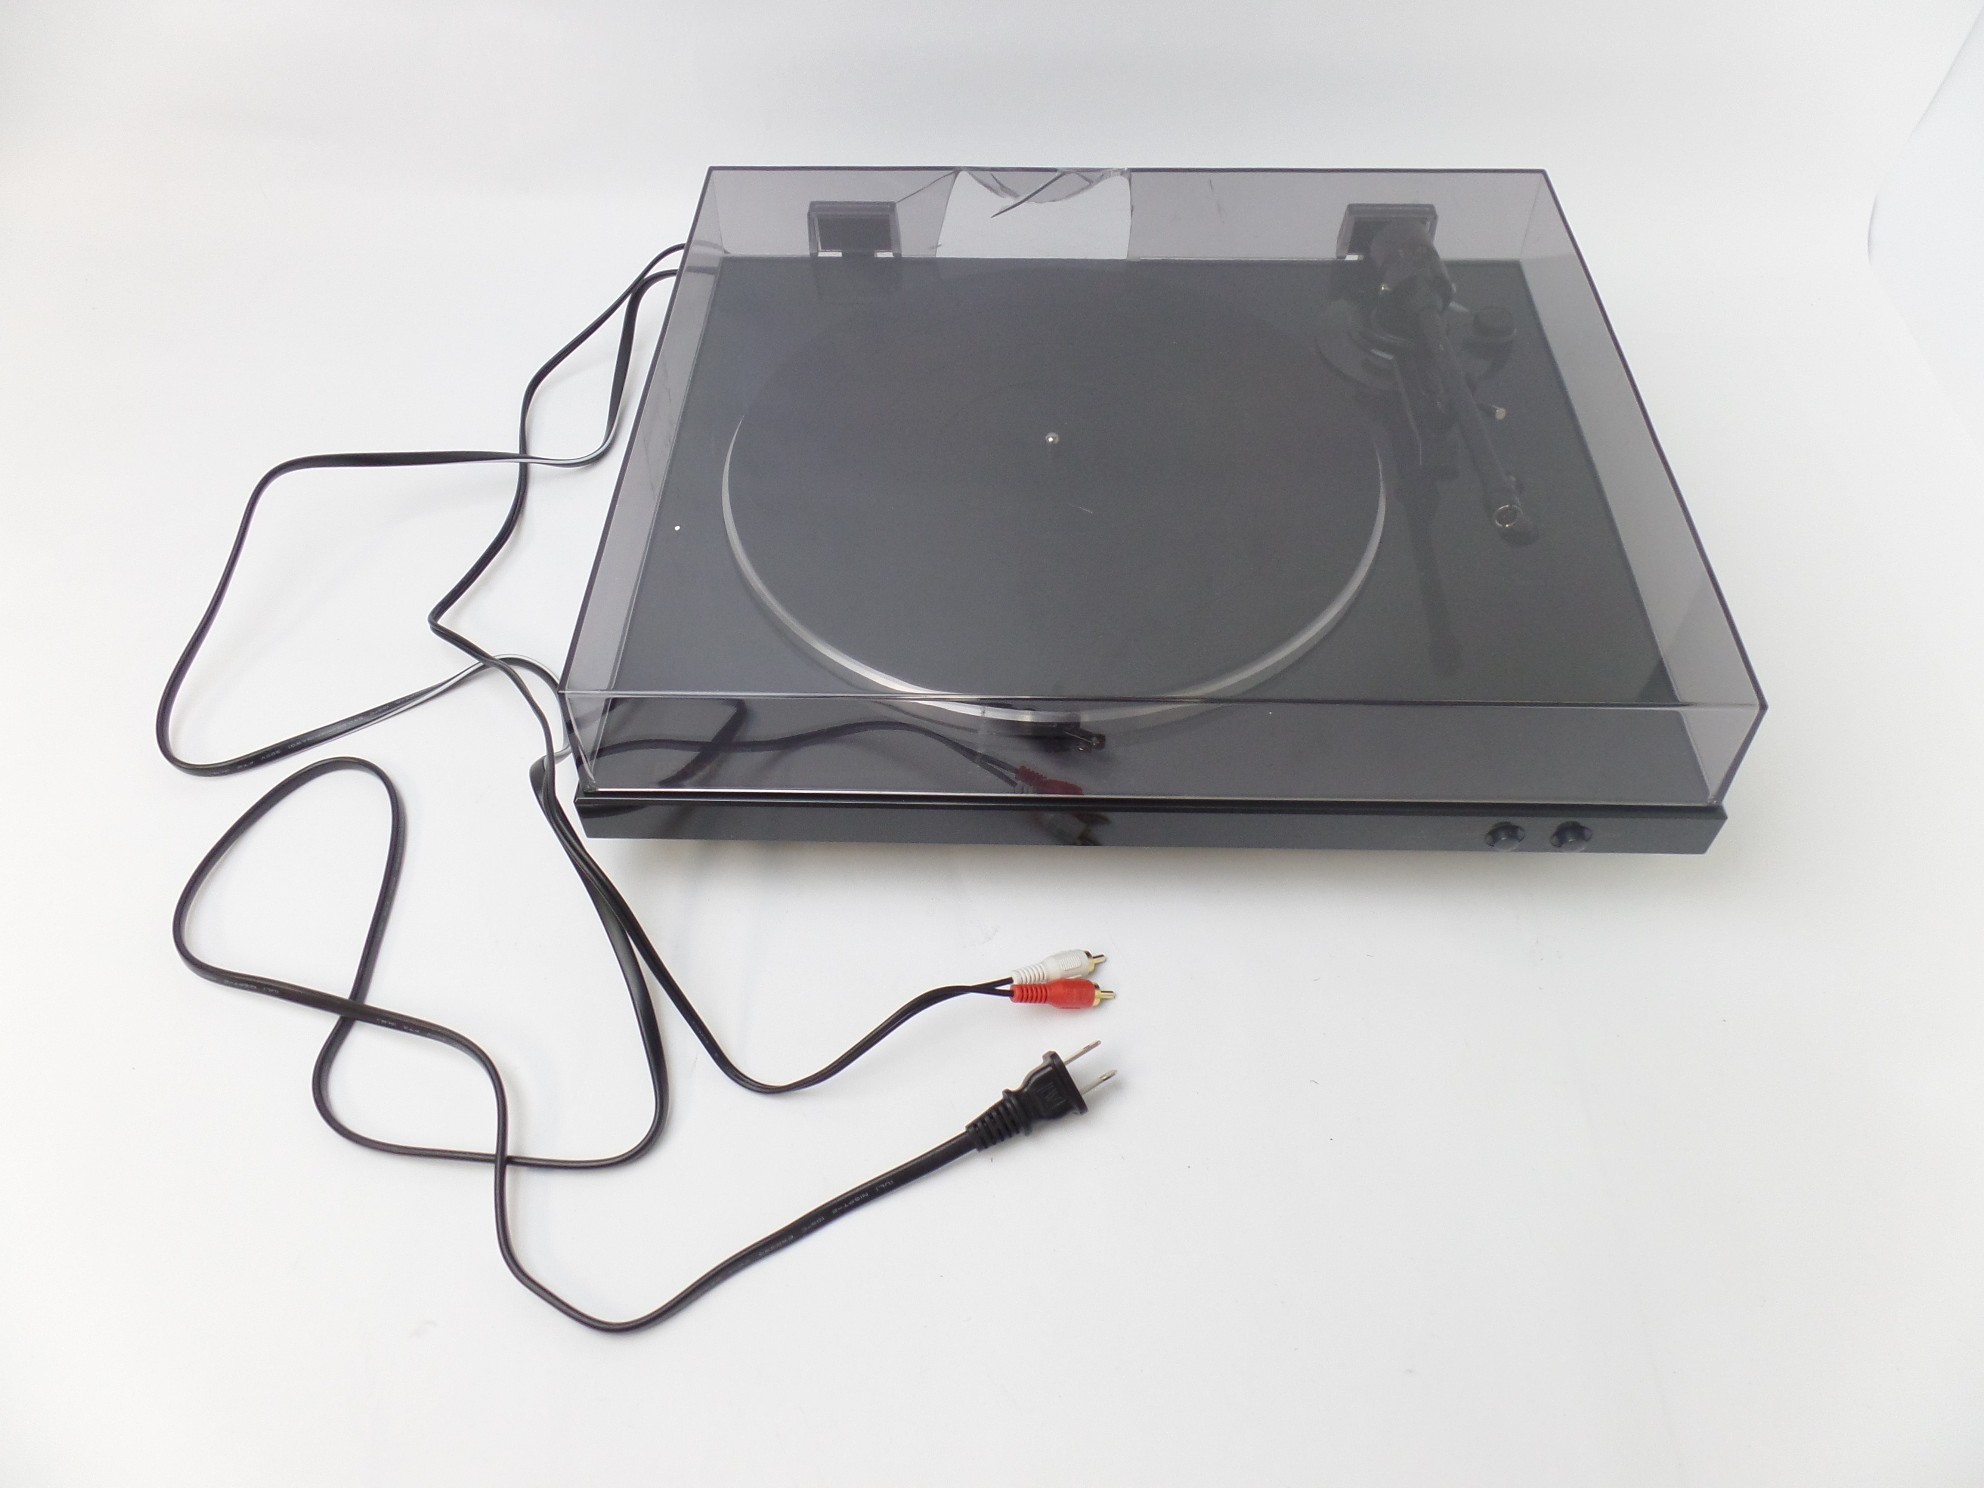 Read: For Parts!!! Denon DP-300F Fully Automatic Analog Turntable